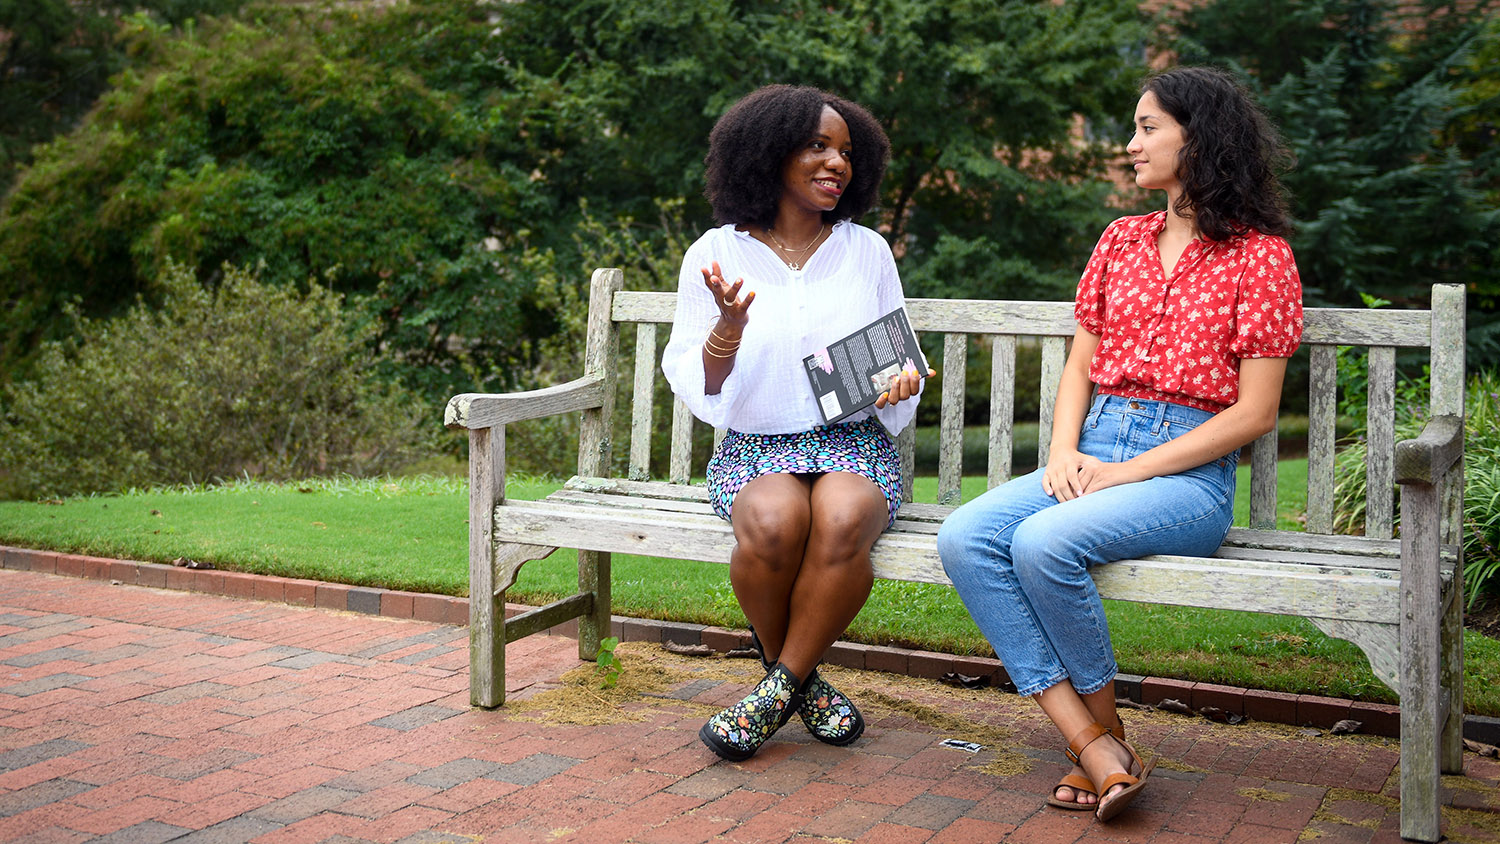 Two graduate students talk on a bench.